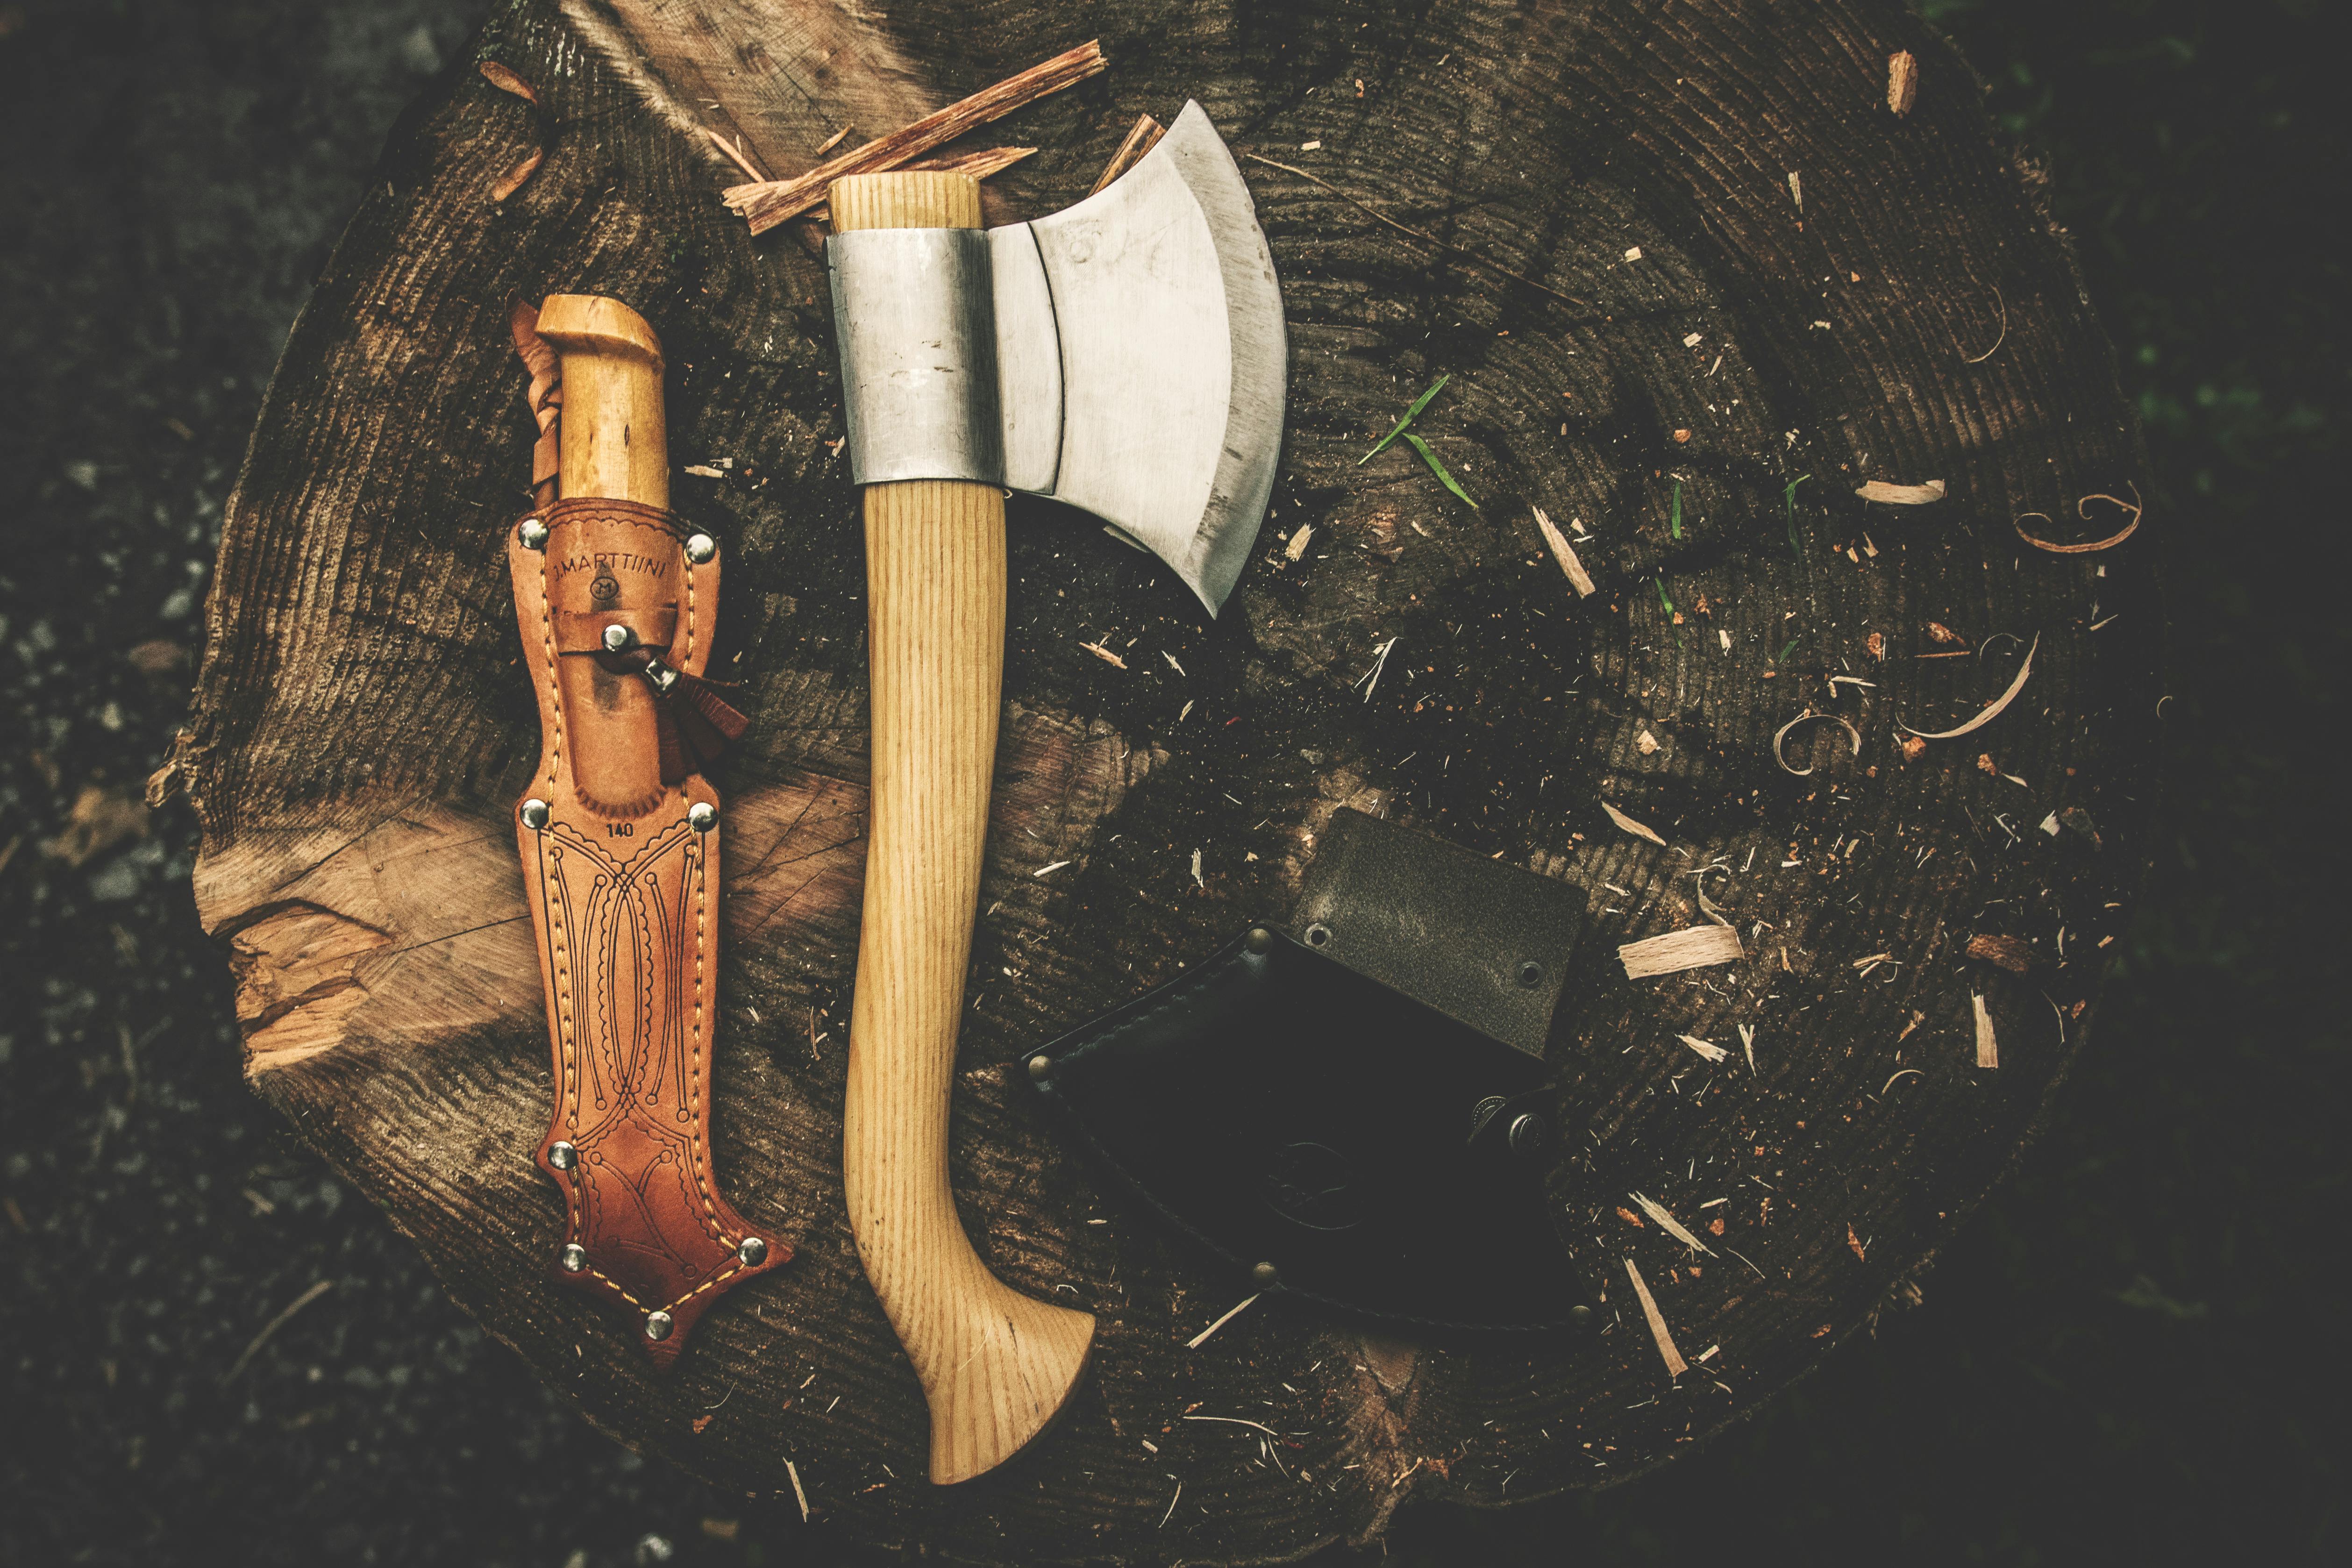 Brown Wooden Axe Besides Brown Leather Knife Holster Free Stock Images, Photos, Reviews